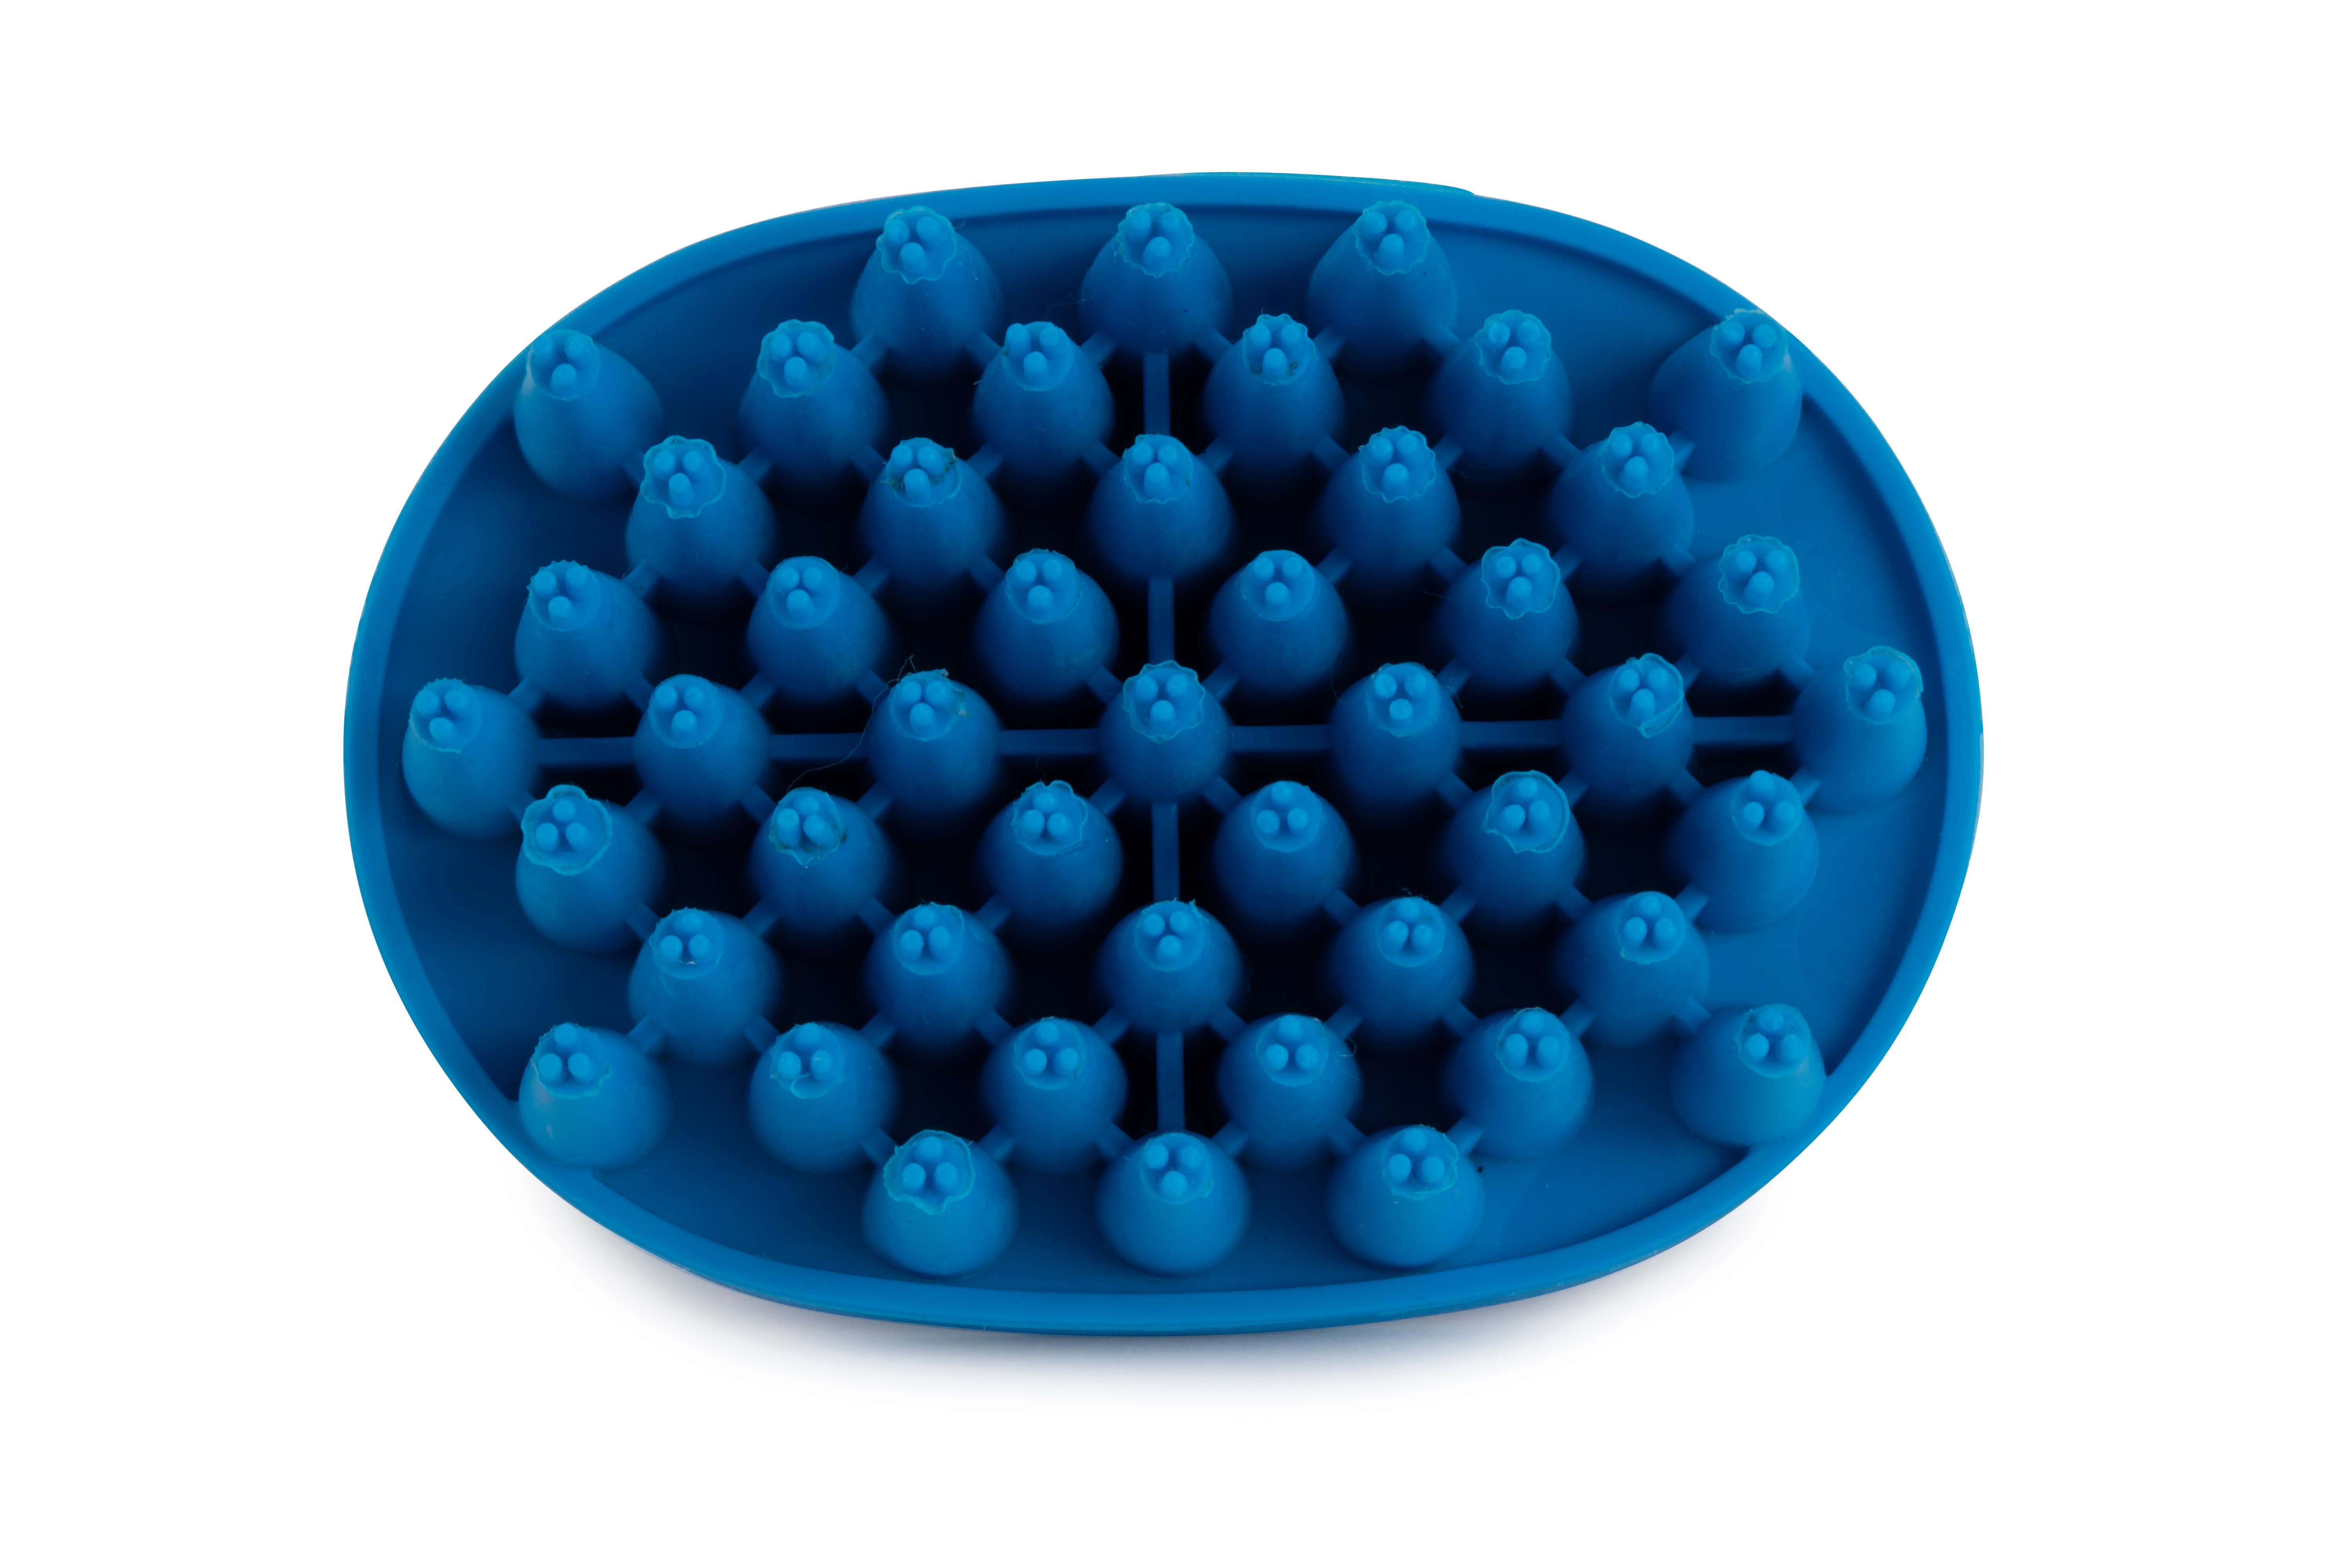 dexas brushbuster silicone pet brush in blue